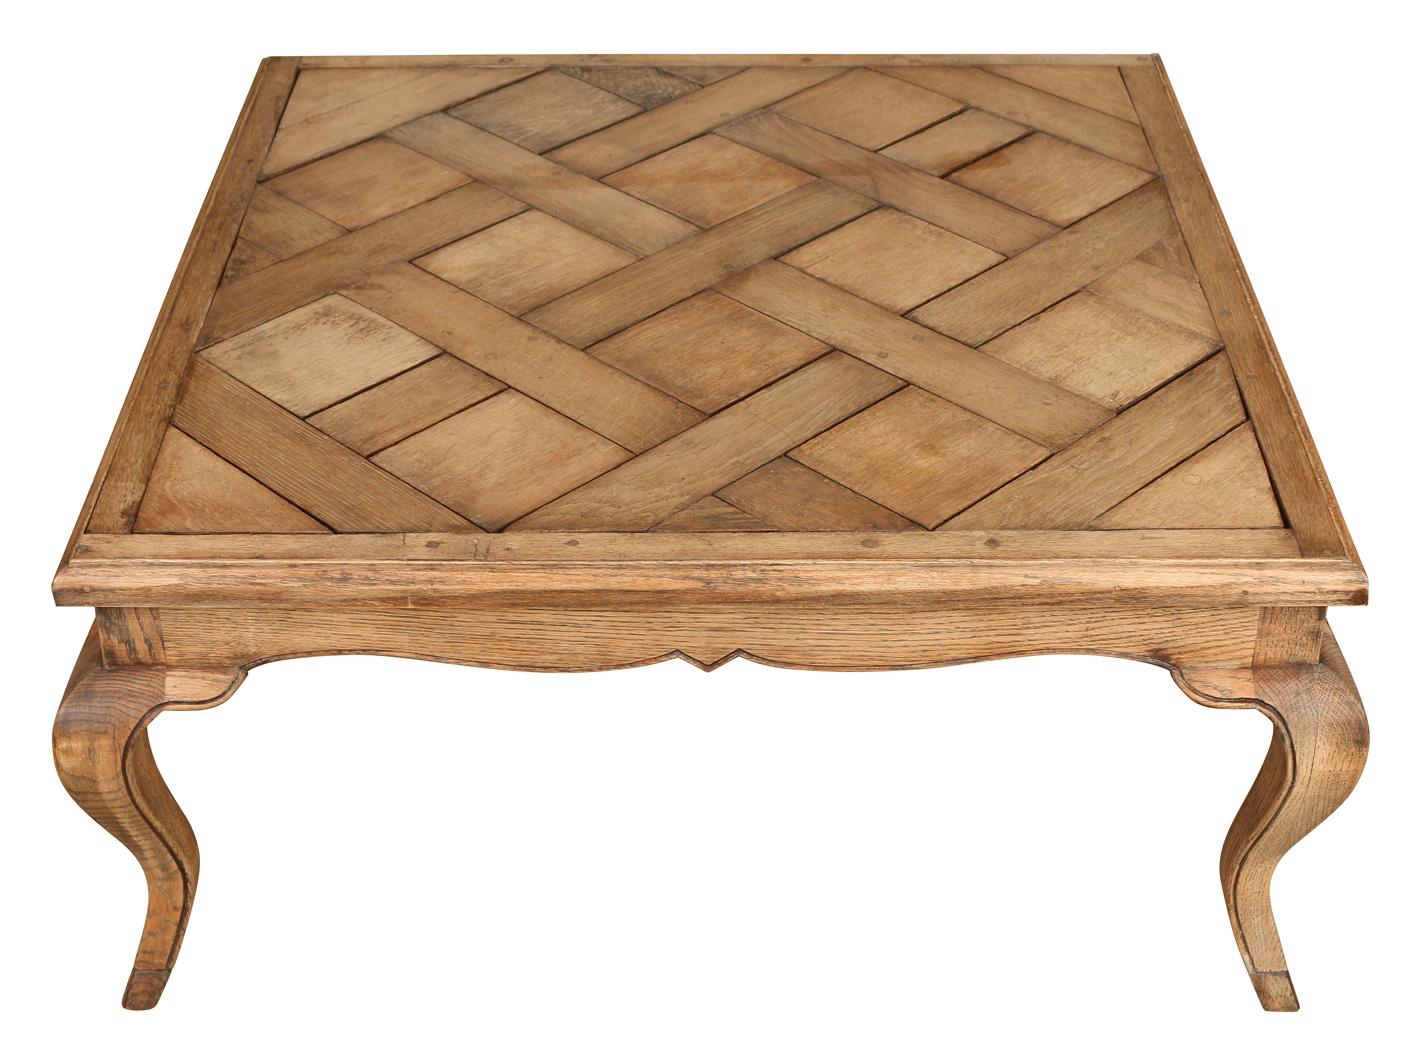 A great looking bleached oak cocktail table with a parquet pattern on the top and cabriole legs. Although the table is traditional in style, its bleached finish gives it a fresh look.  Sturdy in its composition, this table can withstand a lot of use